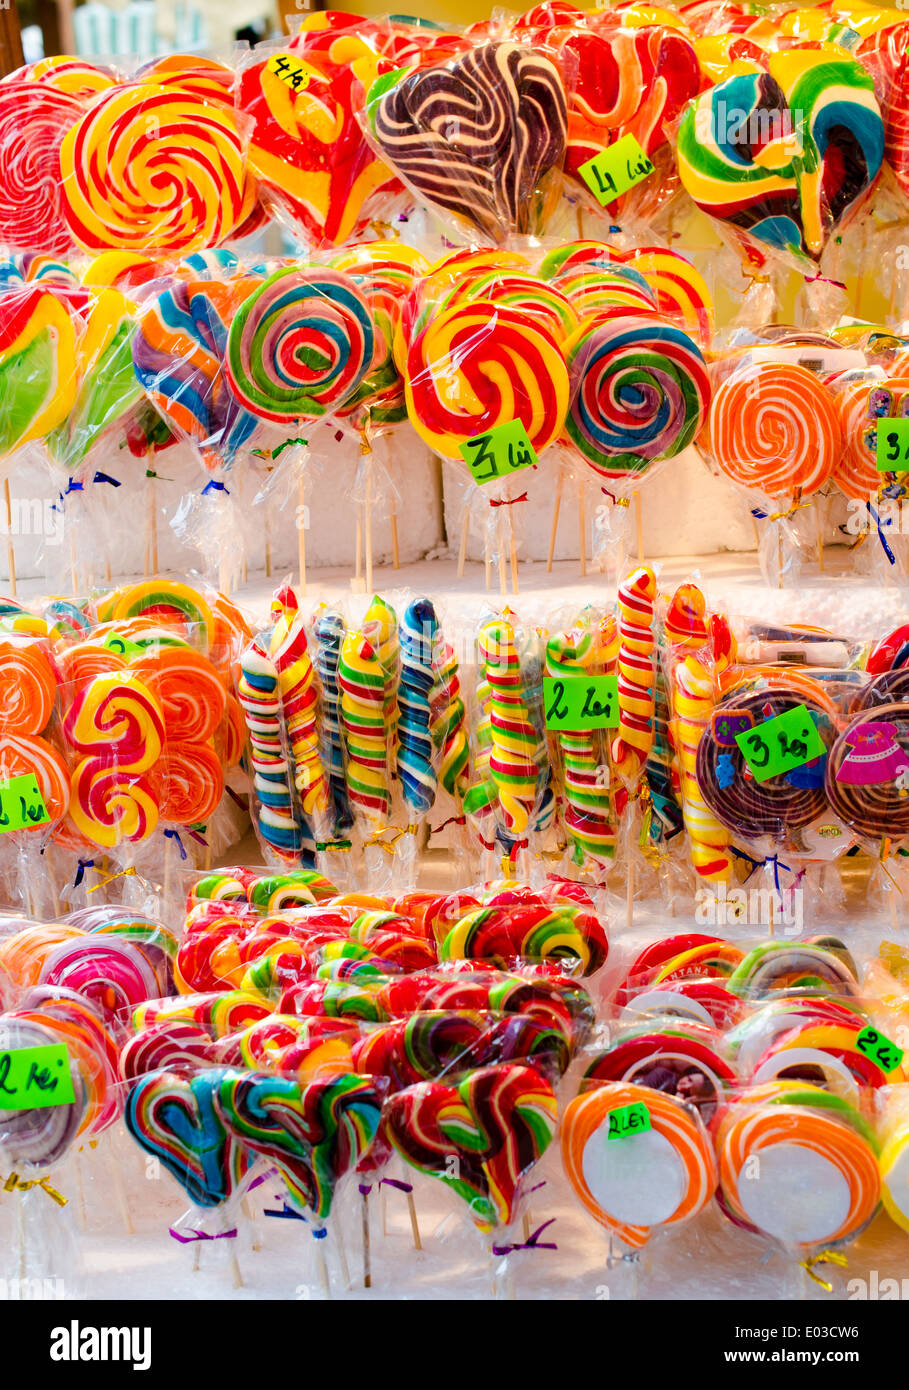 Colorfull lollypops, spiral candies, sweets for children. Stock Photo